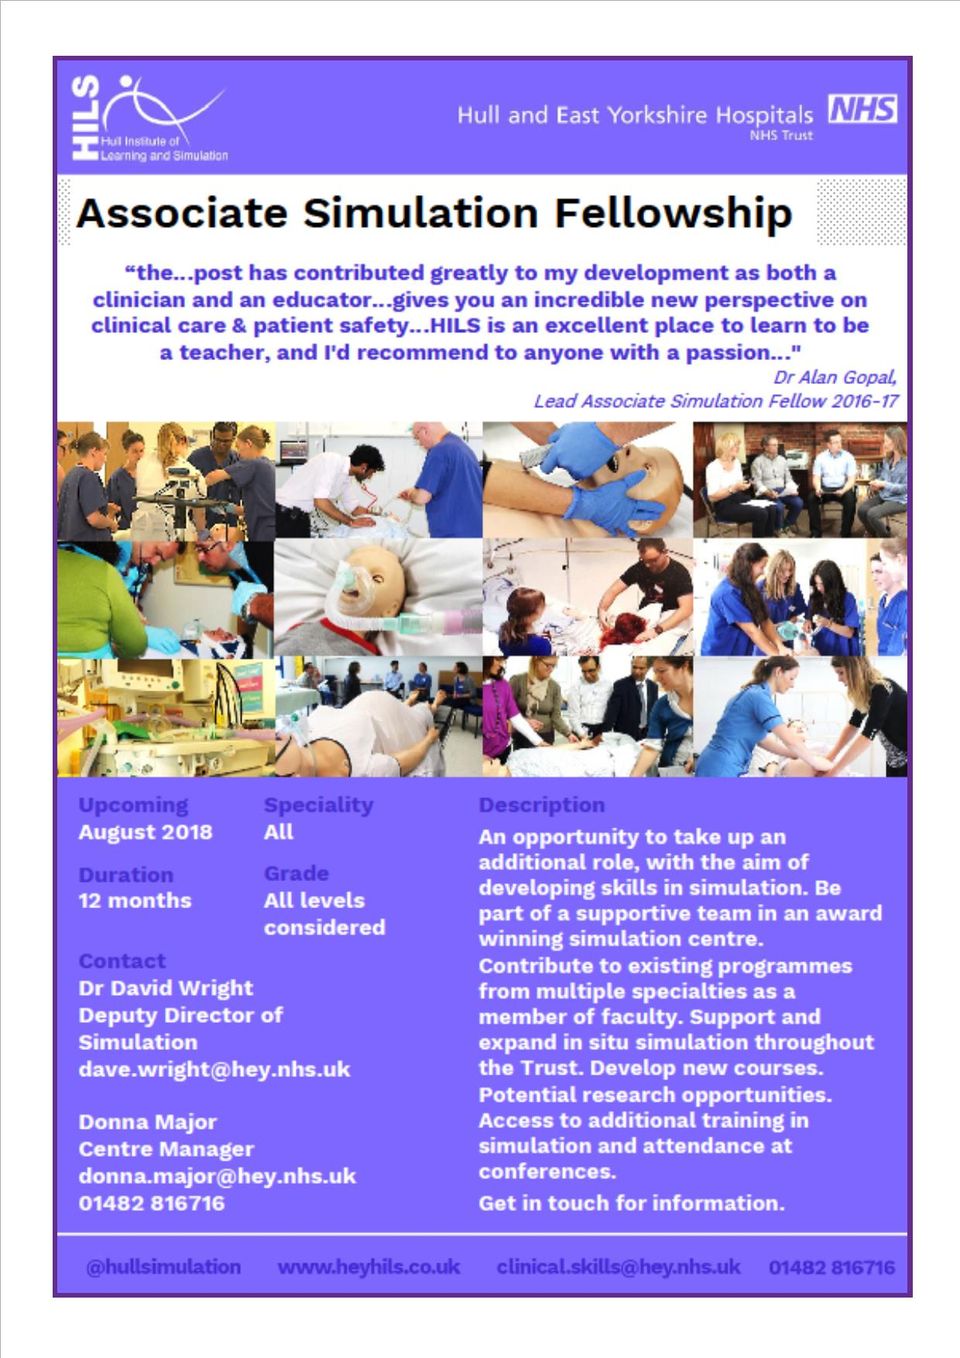 poster about the Associate Simulation Fellowship